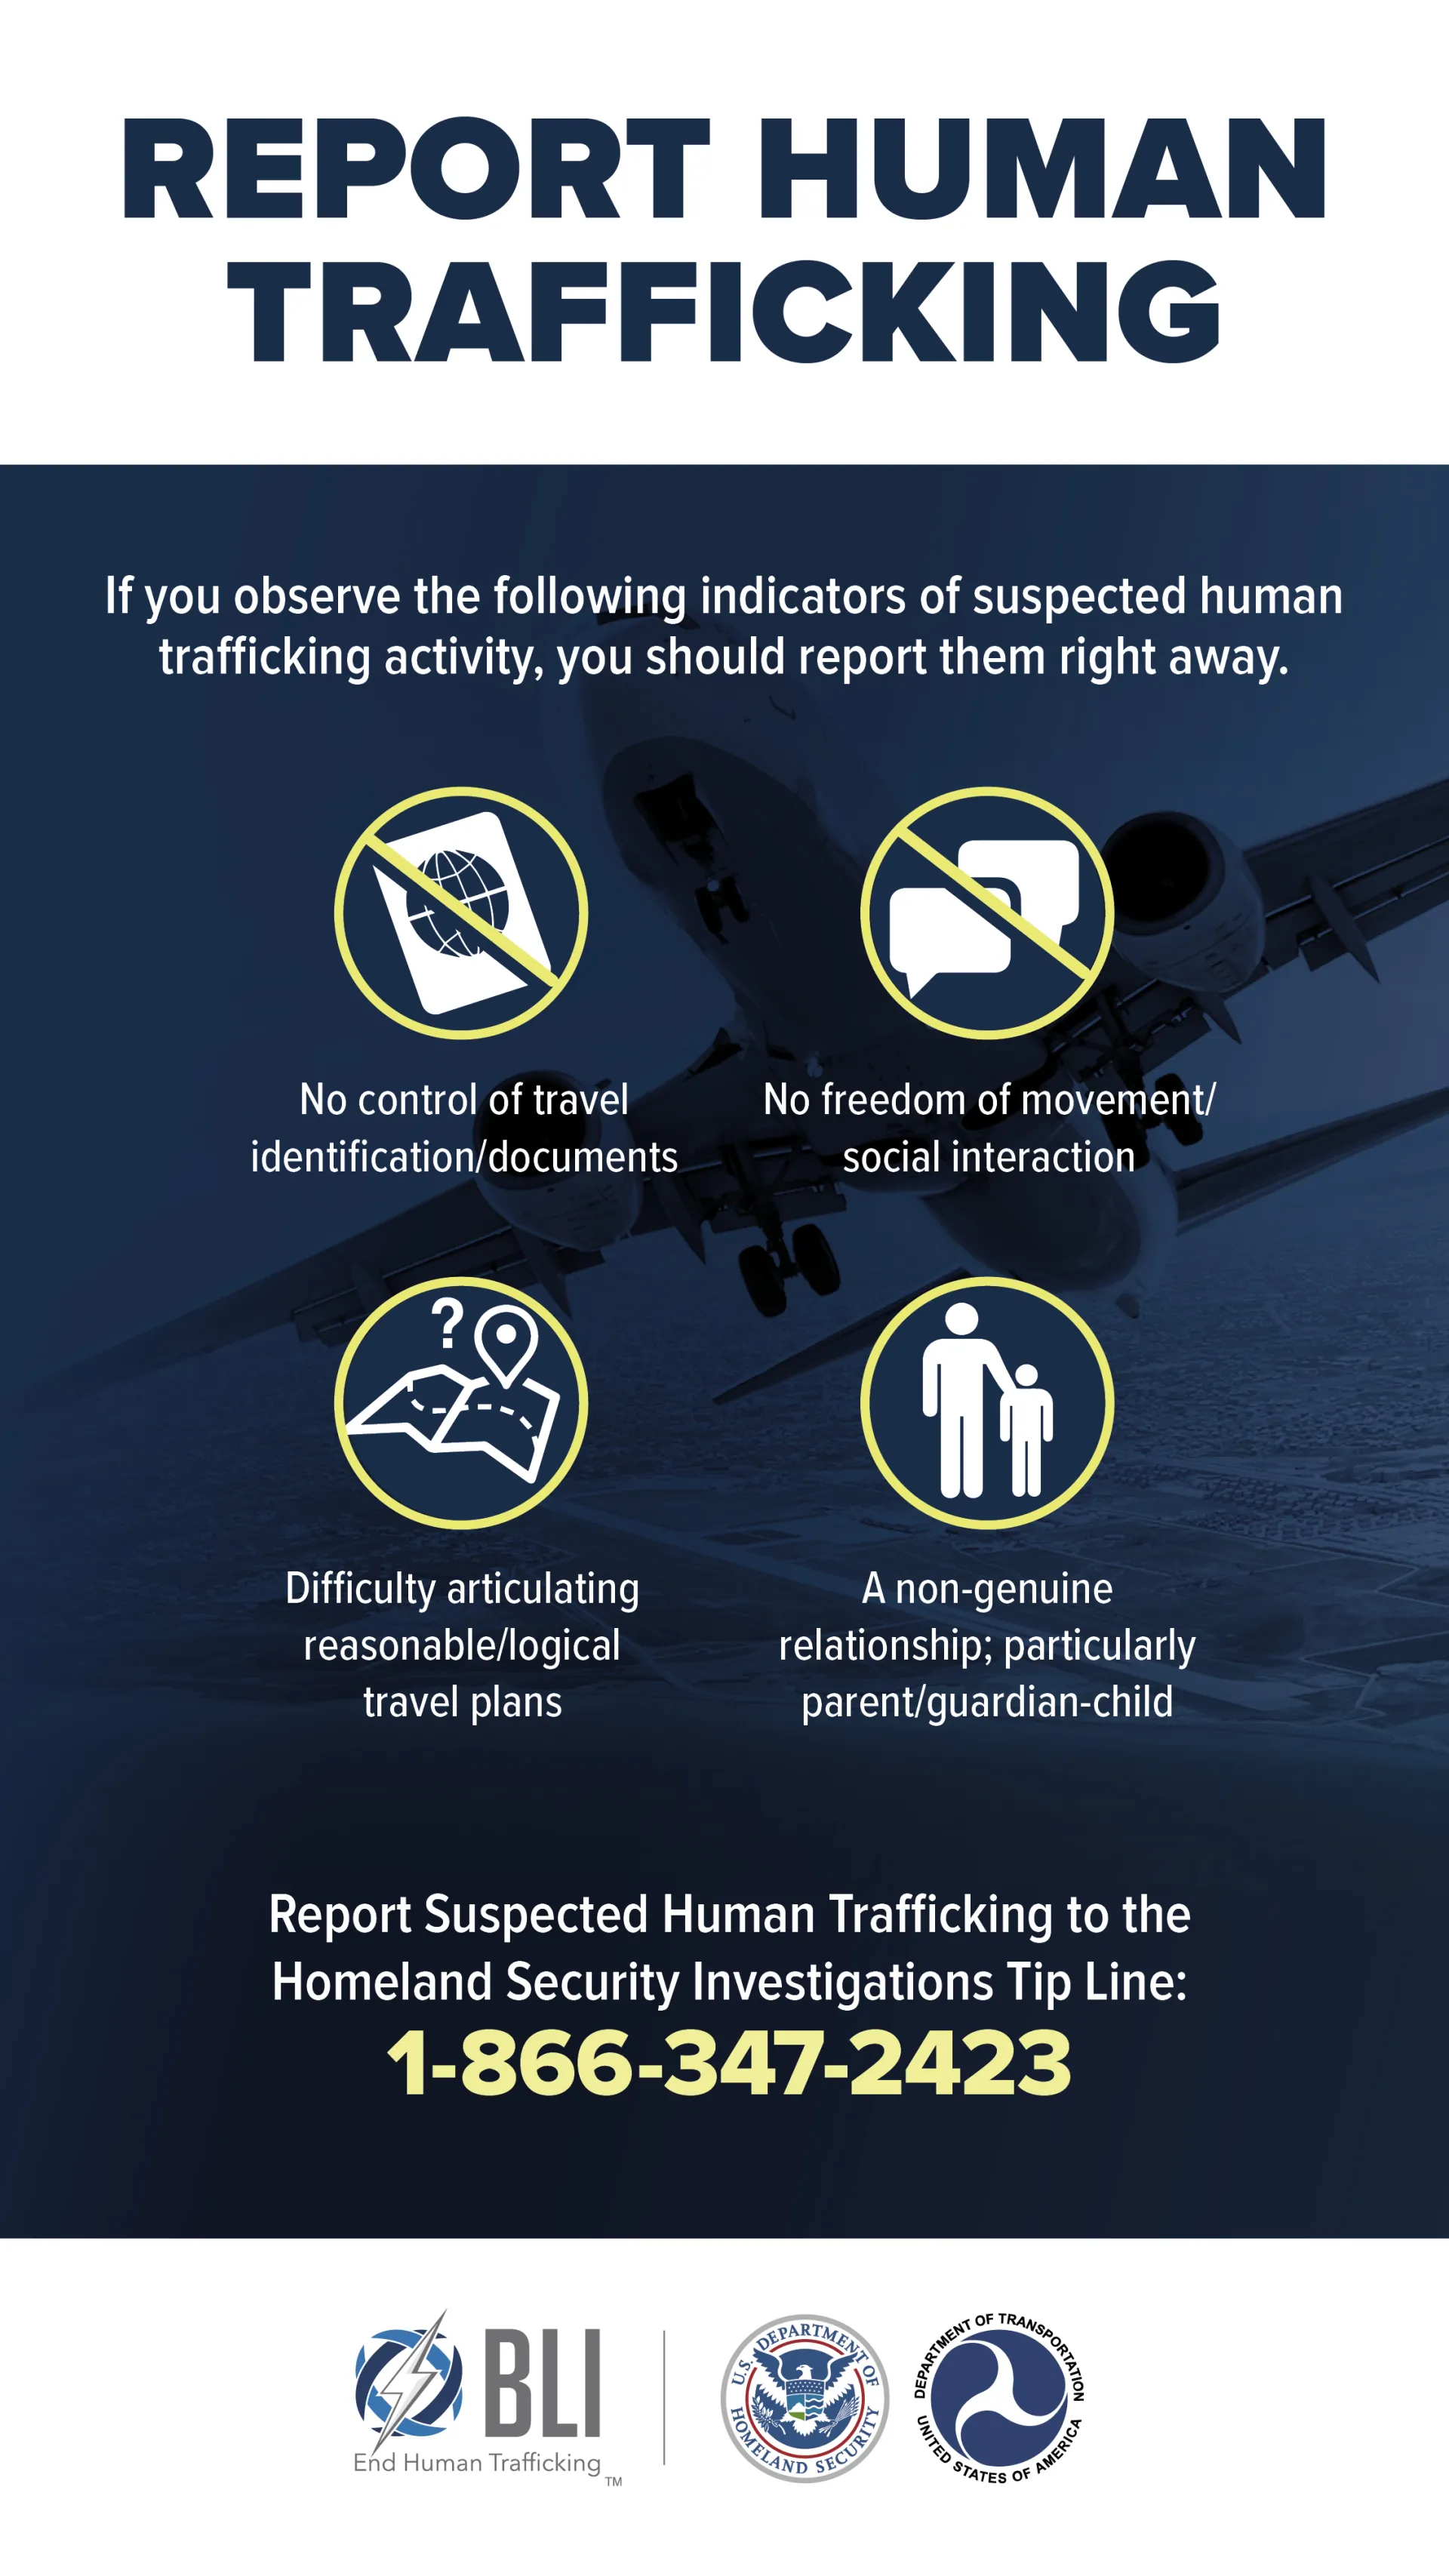 Report Human Trafficking - BLI Airport ad that outlines the indicators of suspected human trafficking activity and how to report them